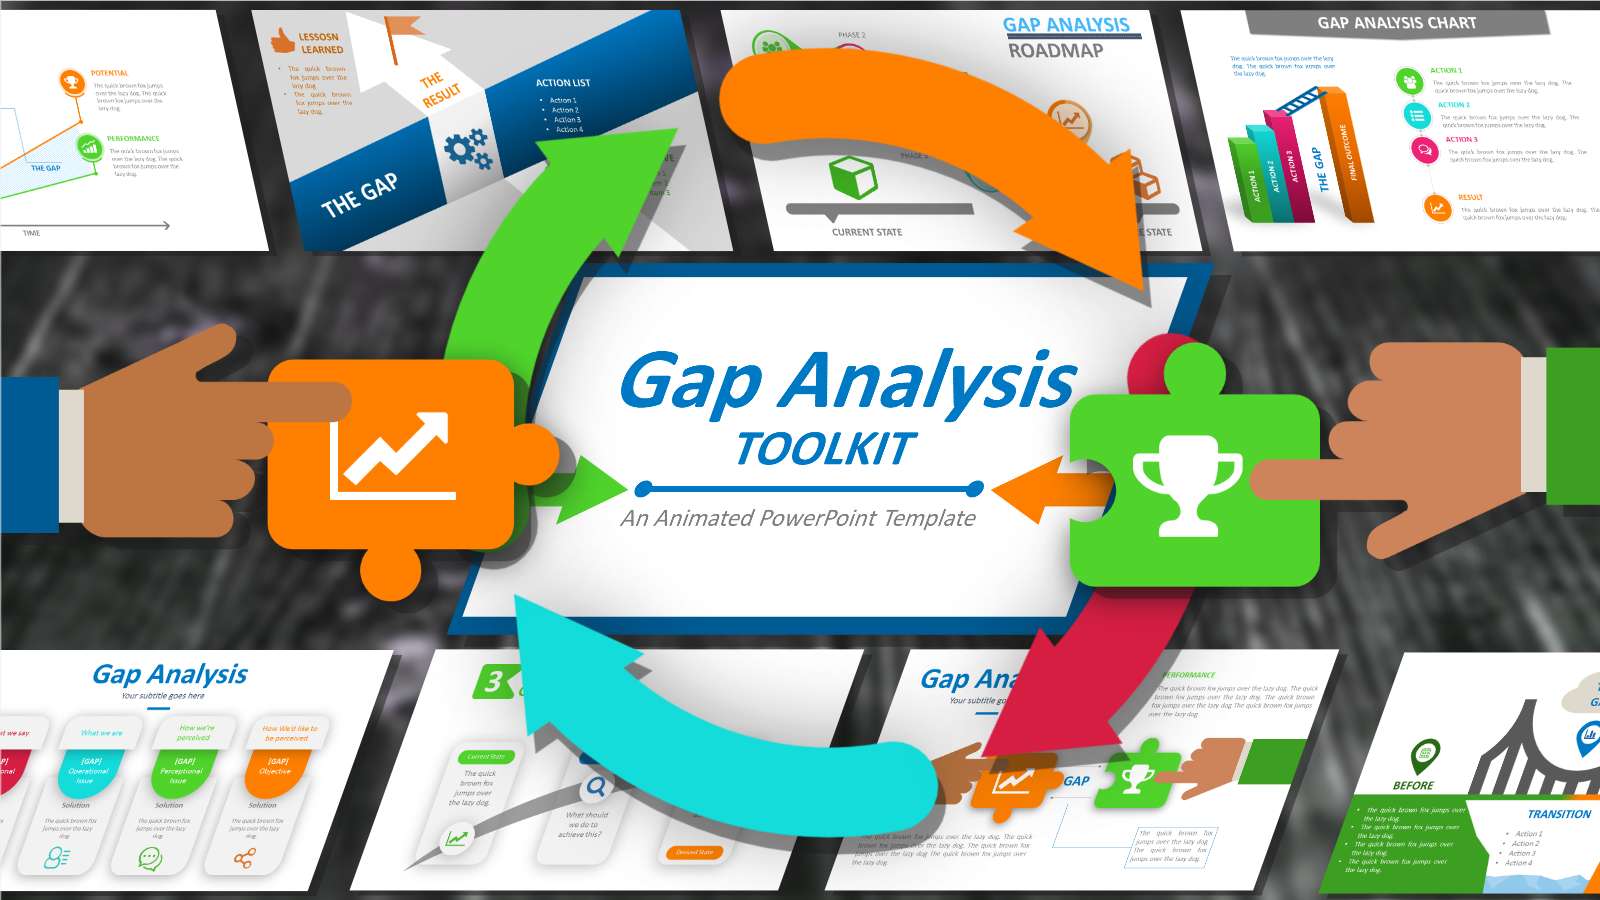 Gap Analysis Toolkit | A PowerPoint Template from PresenterMedia.com